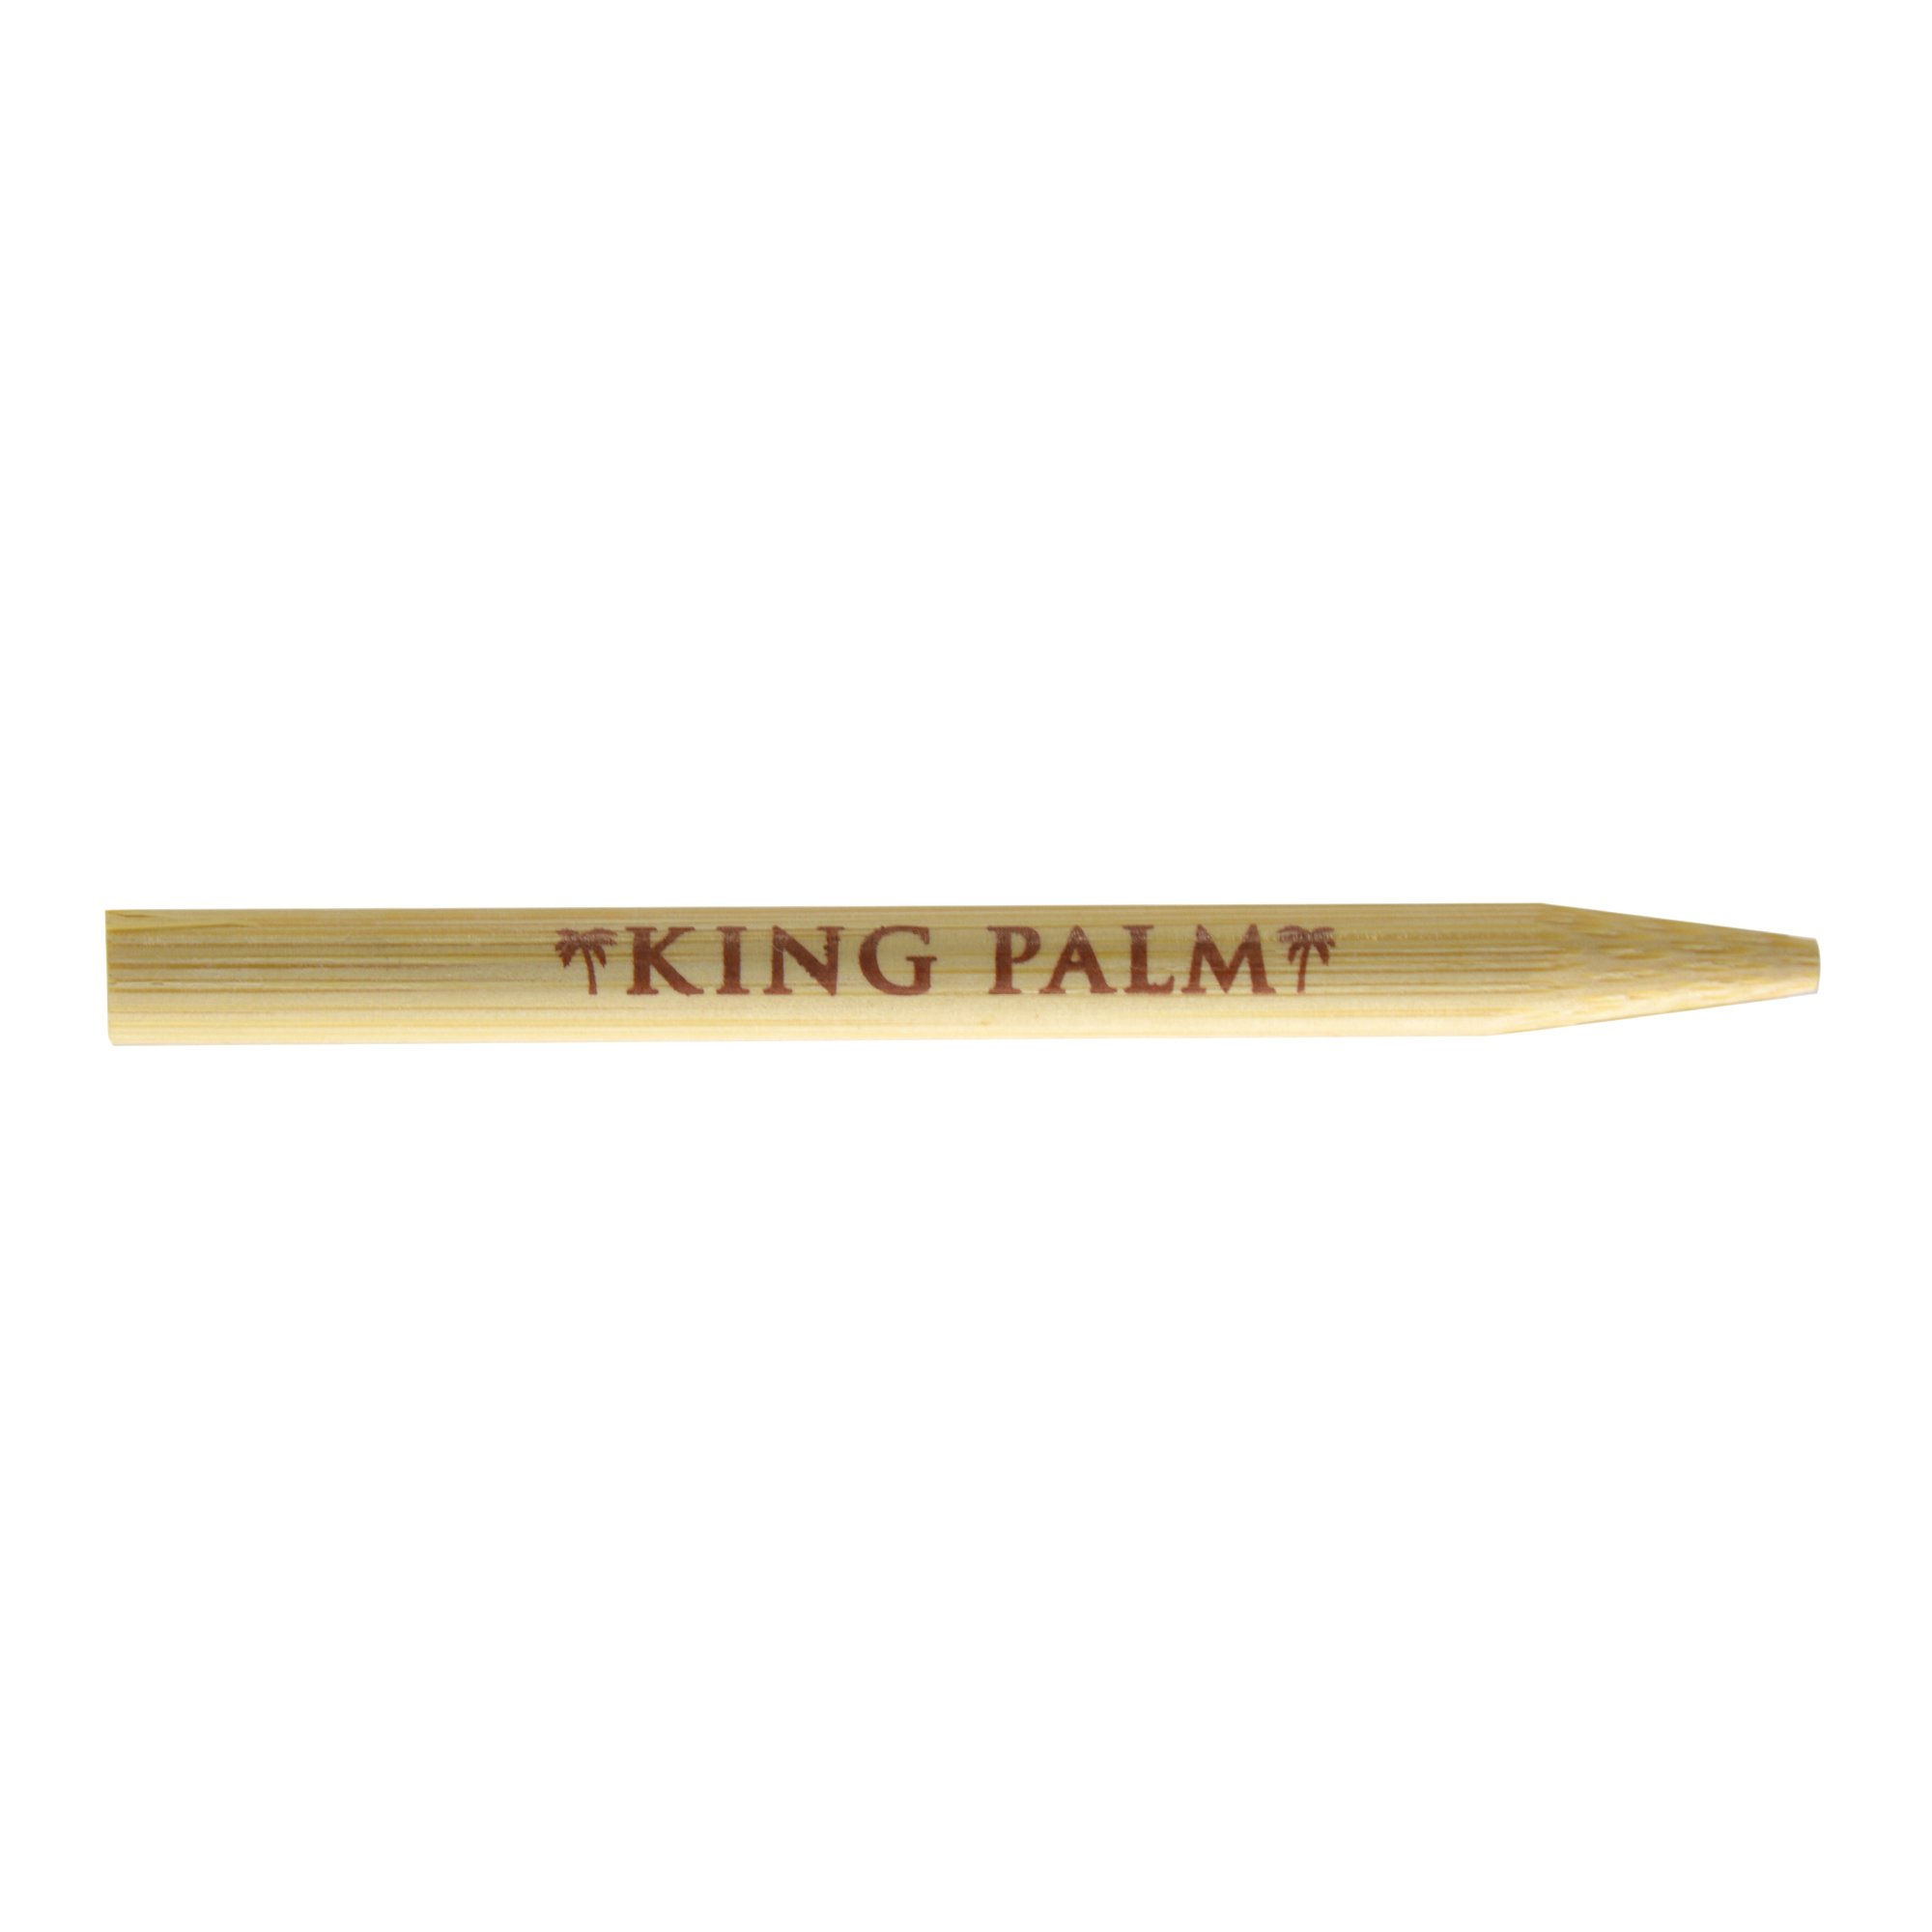 KING PALM | 'Retail Display' Mini Rolled Blunt Wrap Packs | 84mm - Natural Leaf - 8 Count - 6